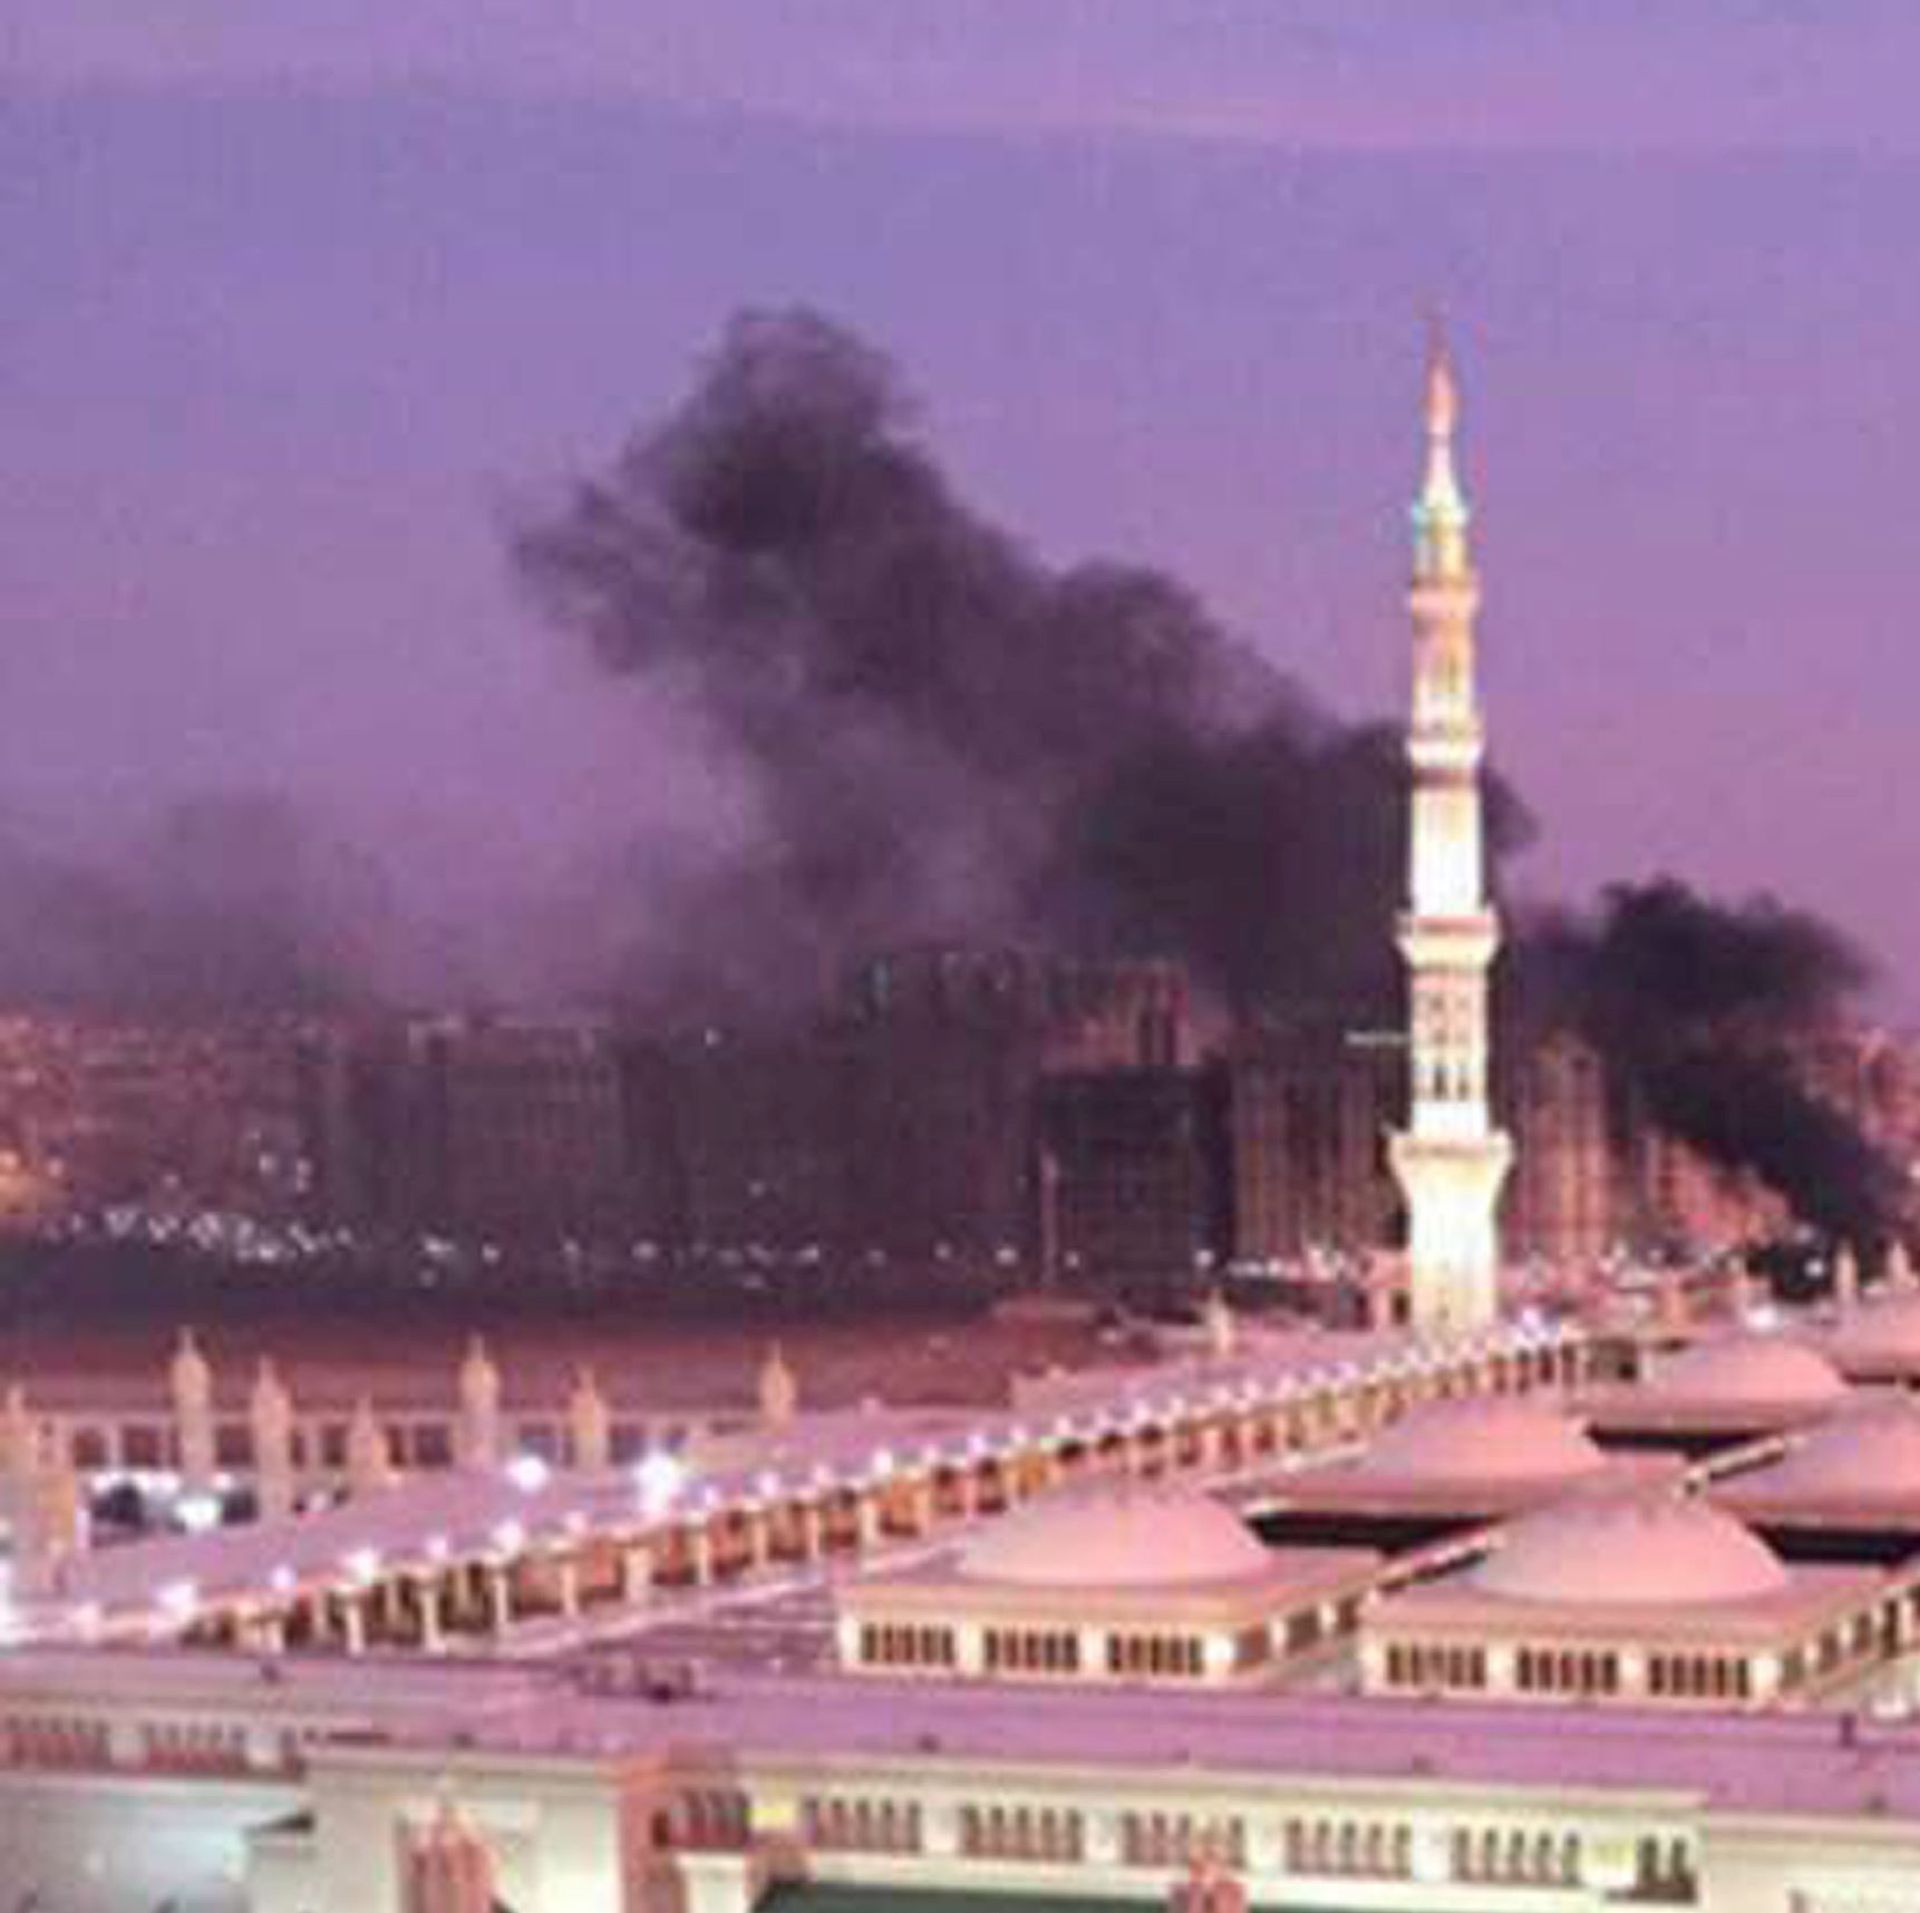 epa05407976 A handout photograph made available by the Saudi Press Agency (SPA) on 04 July 2016 shows the Prophet Mohammed Mosque with smoke rising in the background in the holy city of Medina, in Saudi Arabia, 04 July 2016. Media reports state that an apparent suicide bomber detonated a device at the second holiest site in Islam. Other explosions were also reported from sites in Jeddah and Qatif earlier the same day, which is the last day of the Muslim's Holy Month of Ramadan.  EPA/SAUDI PRESS AGENCY / HANDOUT HANDOUT EDITORIAL USE ONLY/NO SALES HANDOUT EDITORIAL USE ONLY/NO SALES